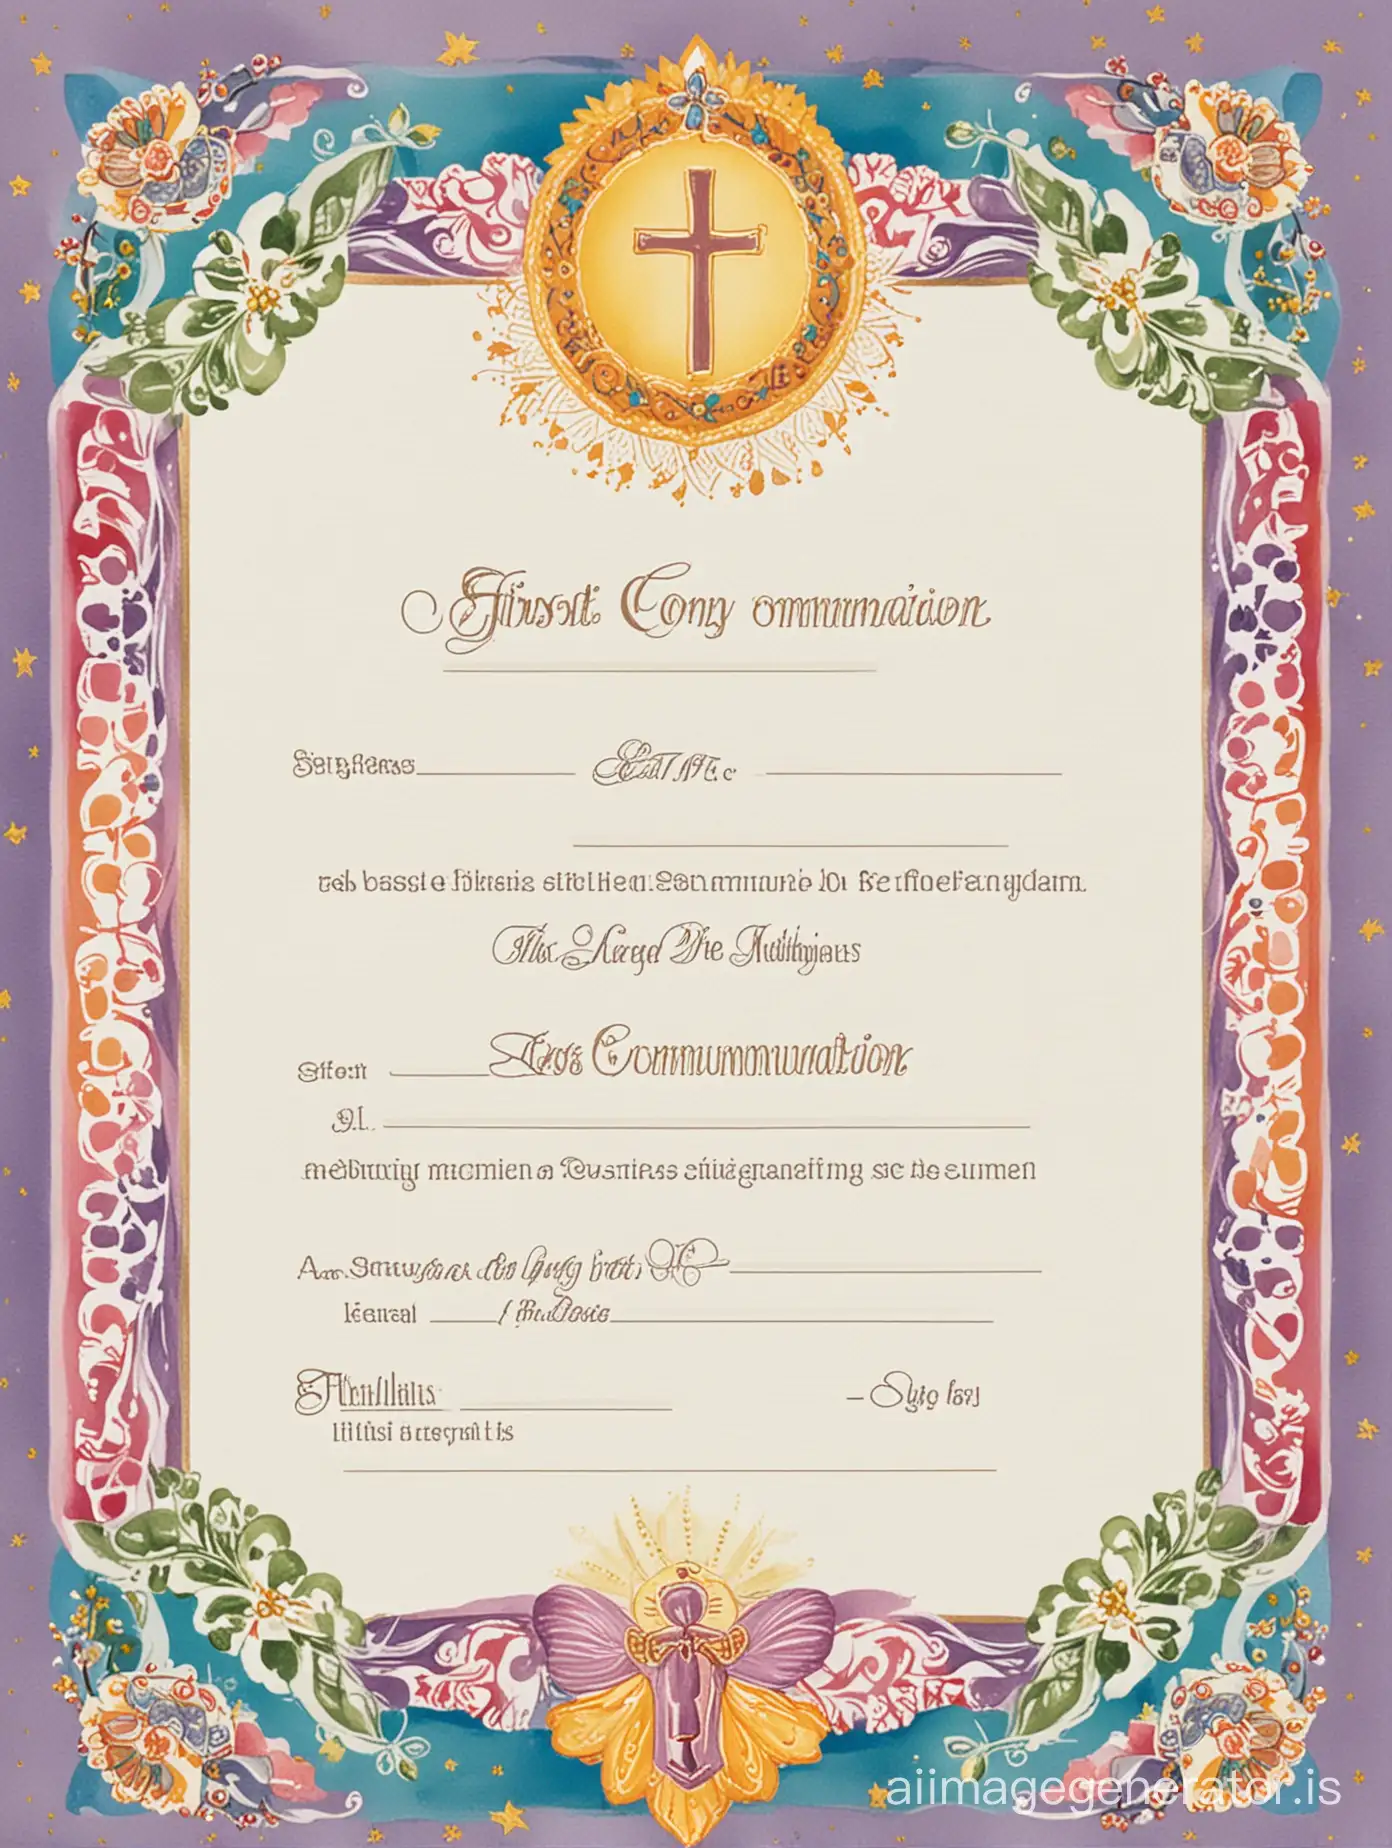 FIRST COMMUNION CERTIFICATE WITH COLORFUL BORDER